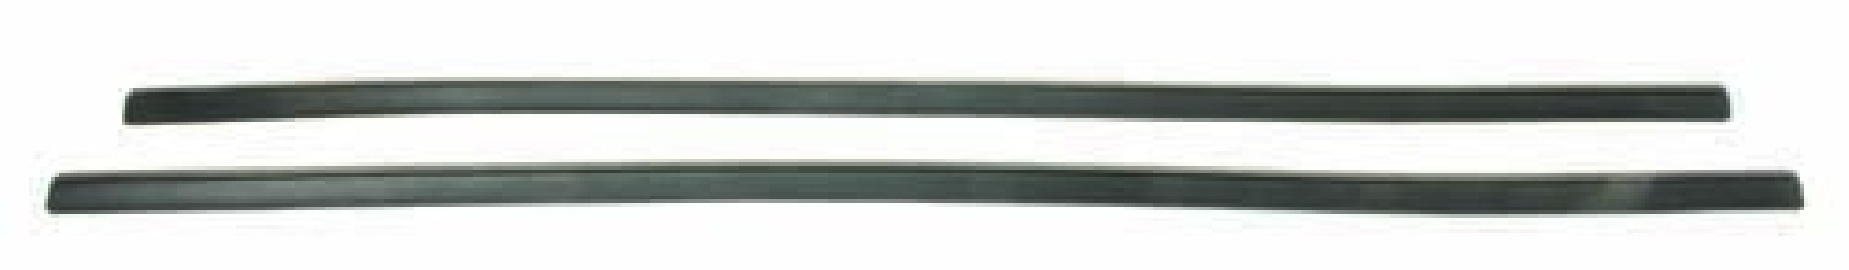 Pop Out Rear Quarter Window Seals, Upright, Pair, Ghia 72-74